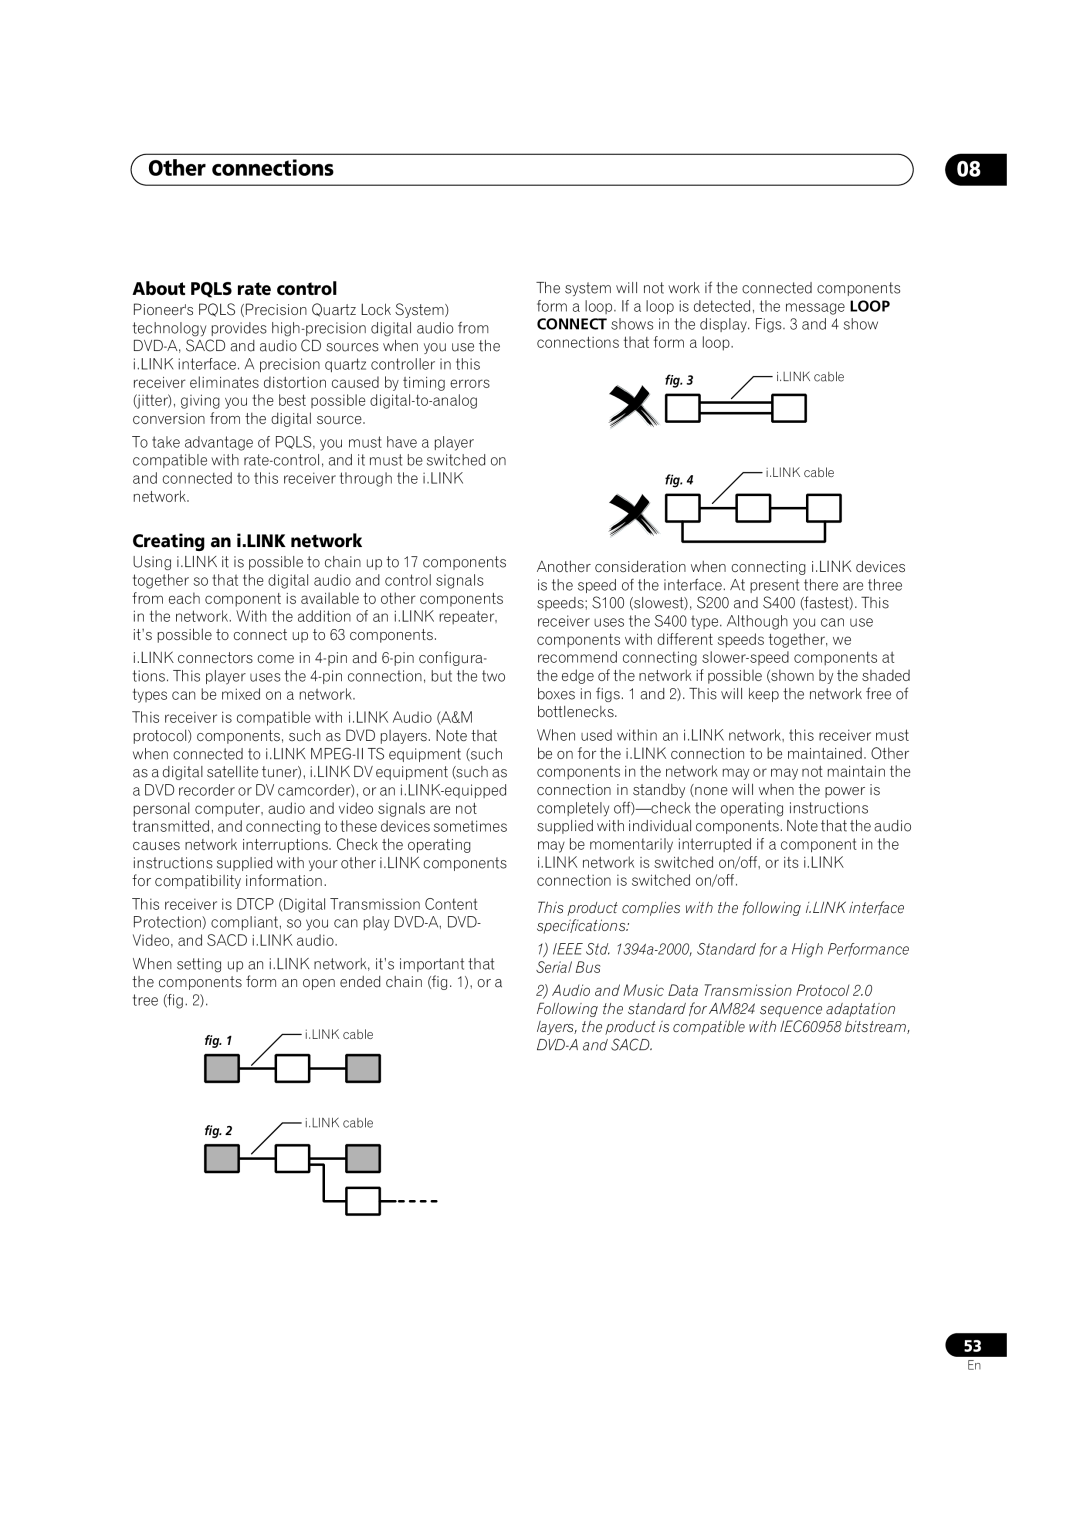 Pioneer VSX-82TXS-S, VSX-84TXSI, VSX-84TXSi-S manual About PQLS rate control, Creating an i.LINK network, Other connections 